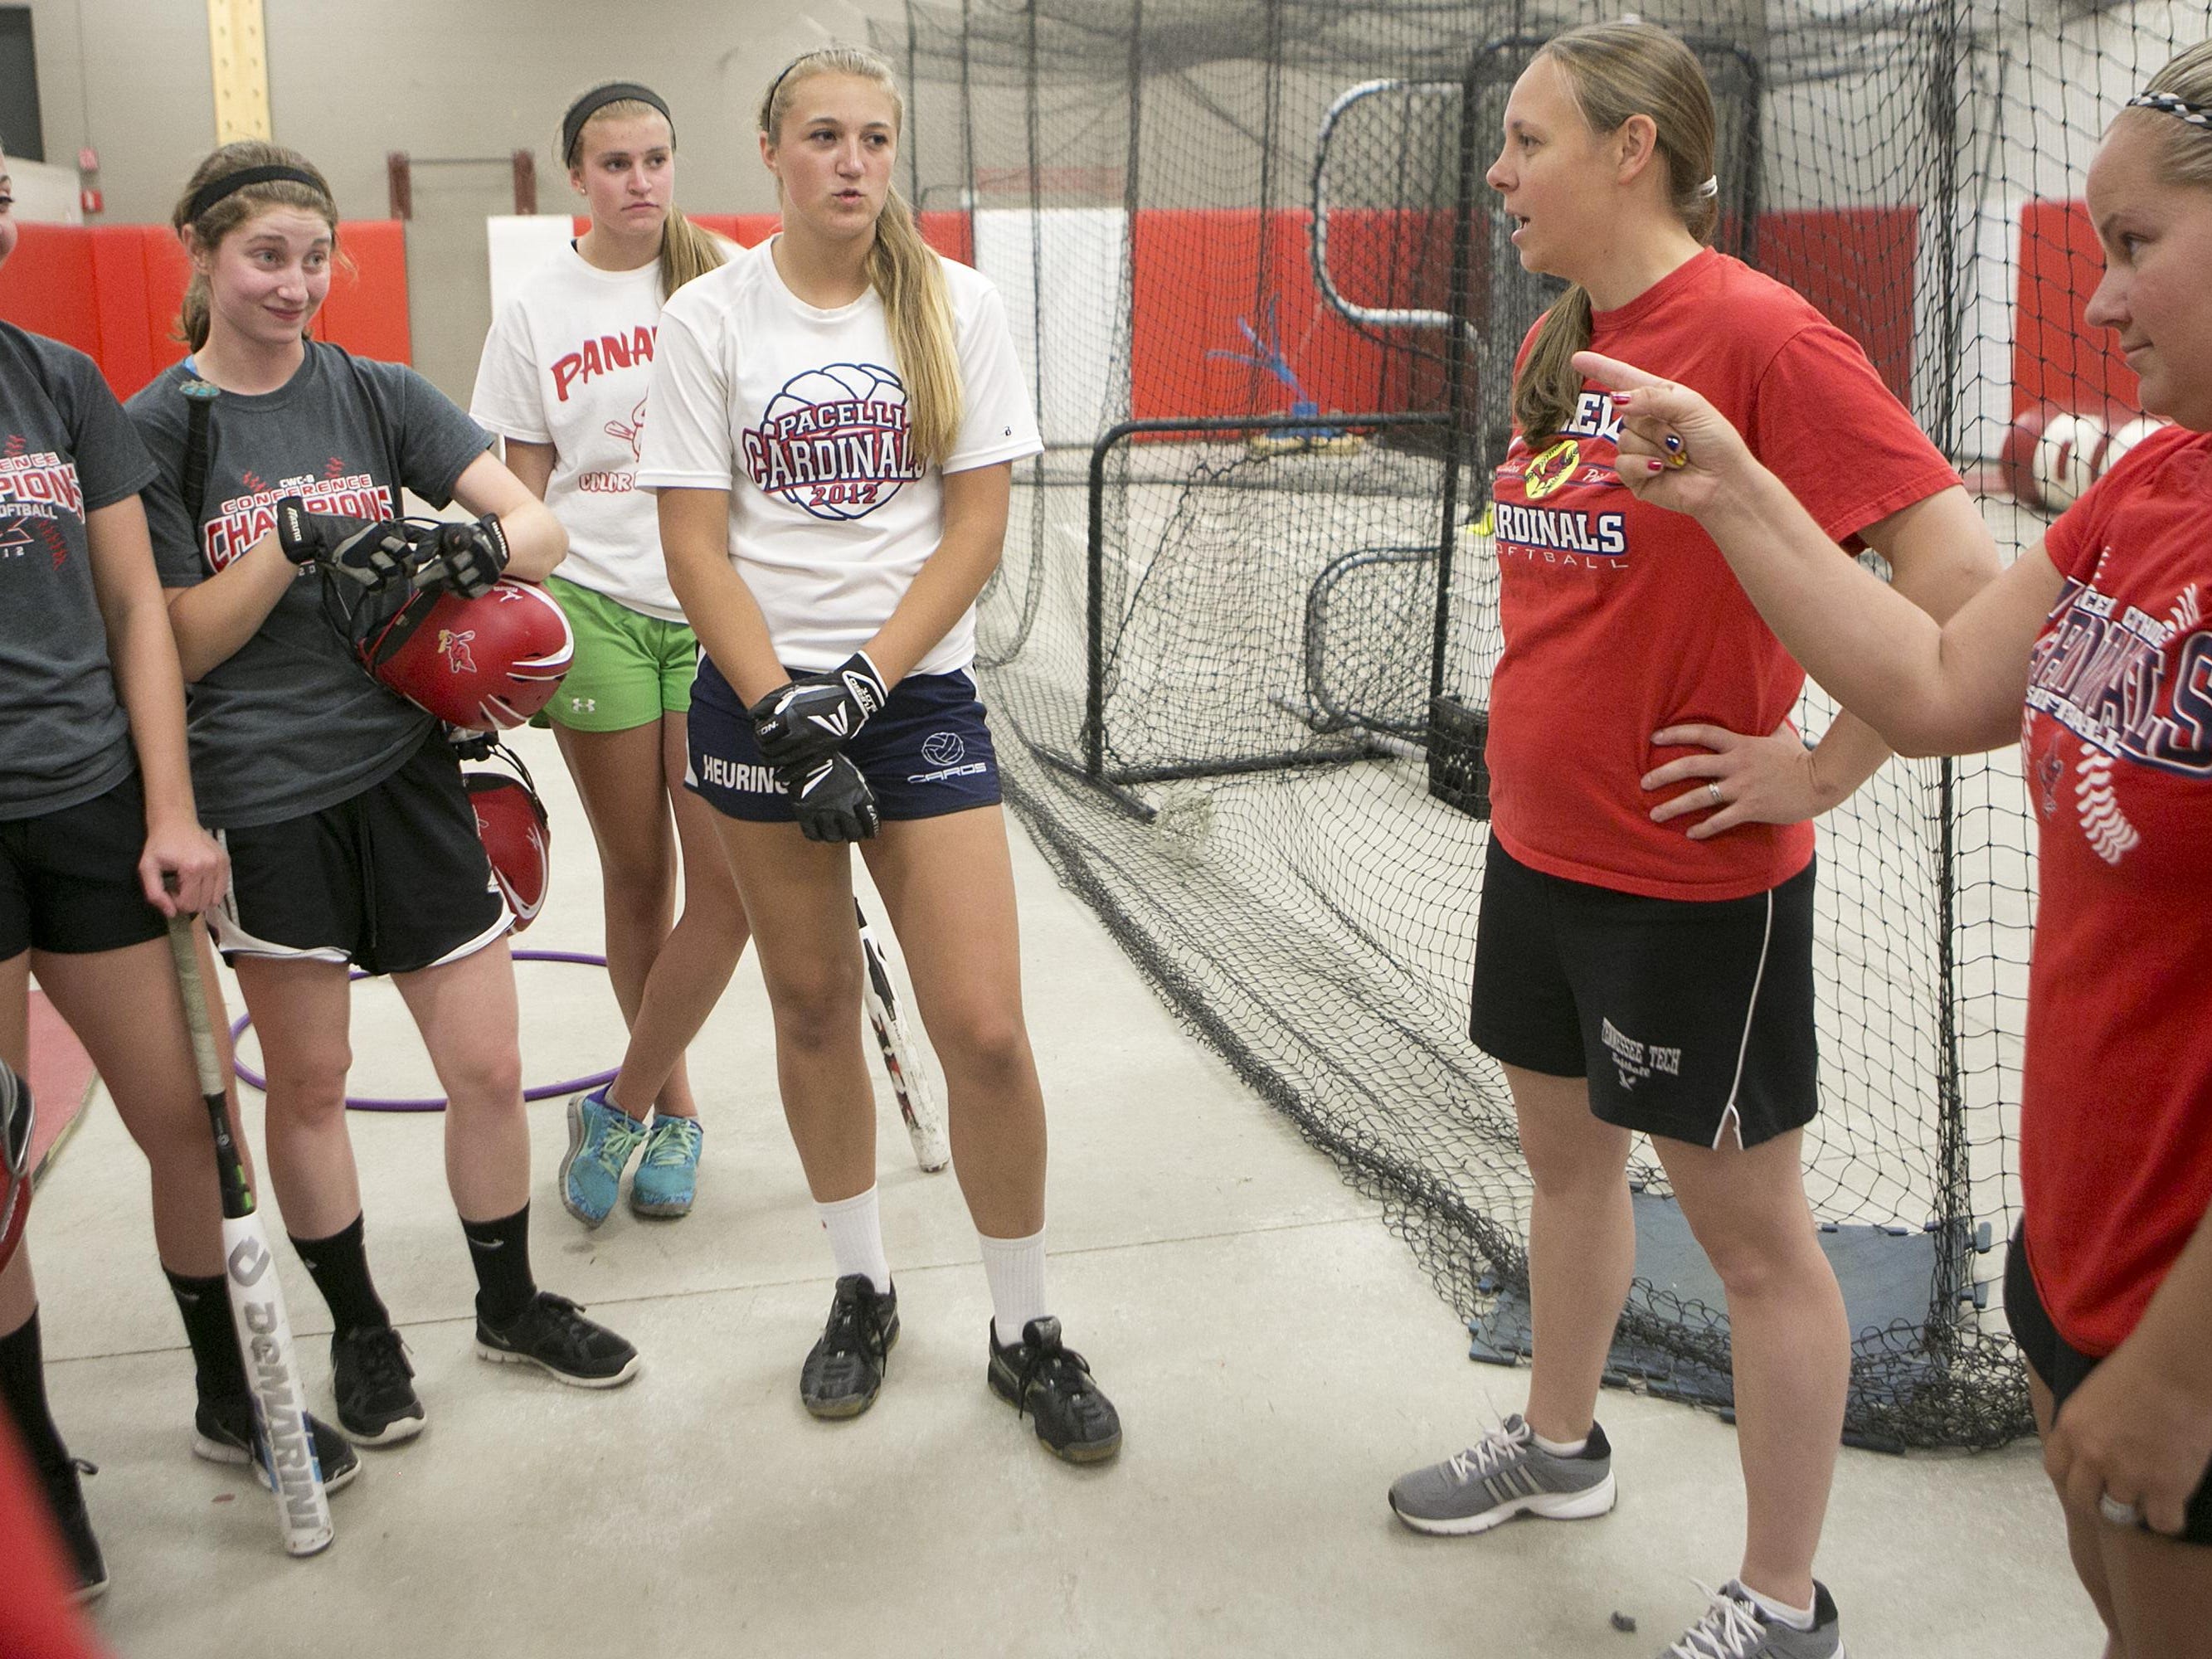 Pacelli's assistant softball coaches Beth Boden Nemec, center, and Stephanie Treichel, right, talk to the softball players during practice in the batting cages at Pacelli High School in Stevens Point, Friday, June 12, 2015.